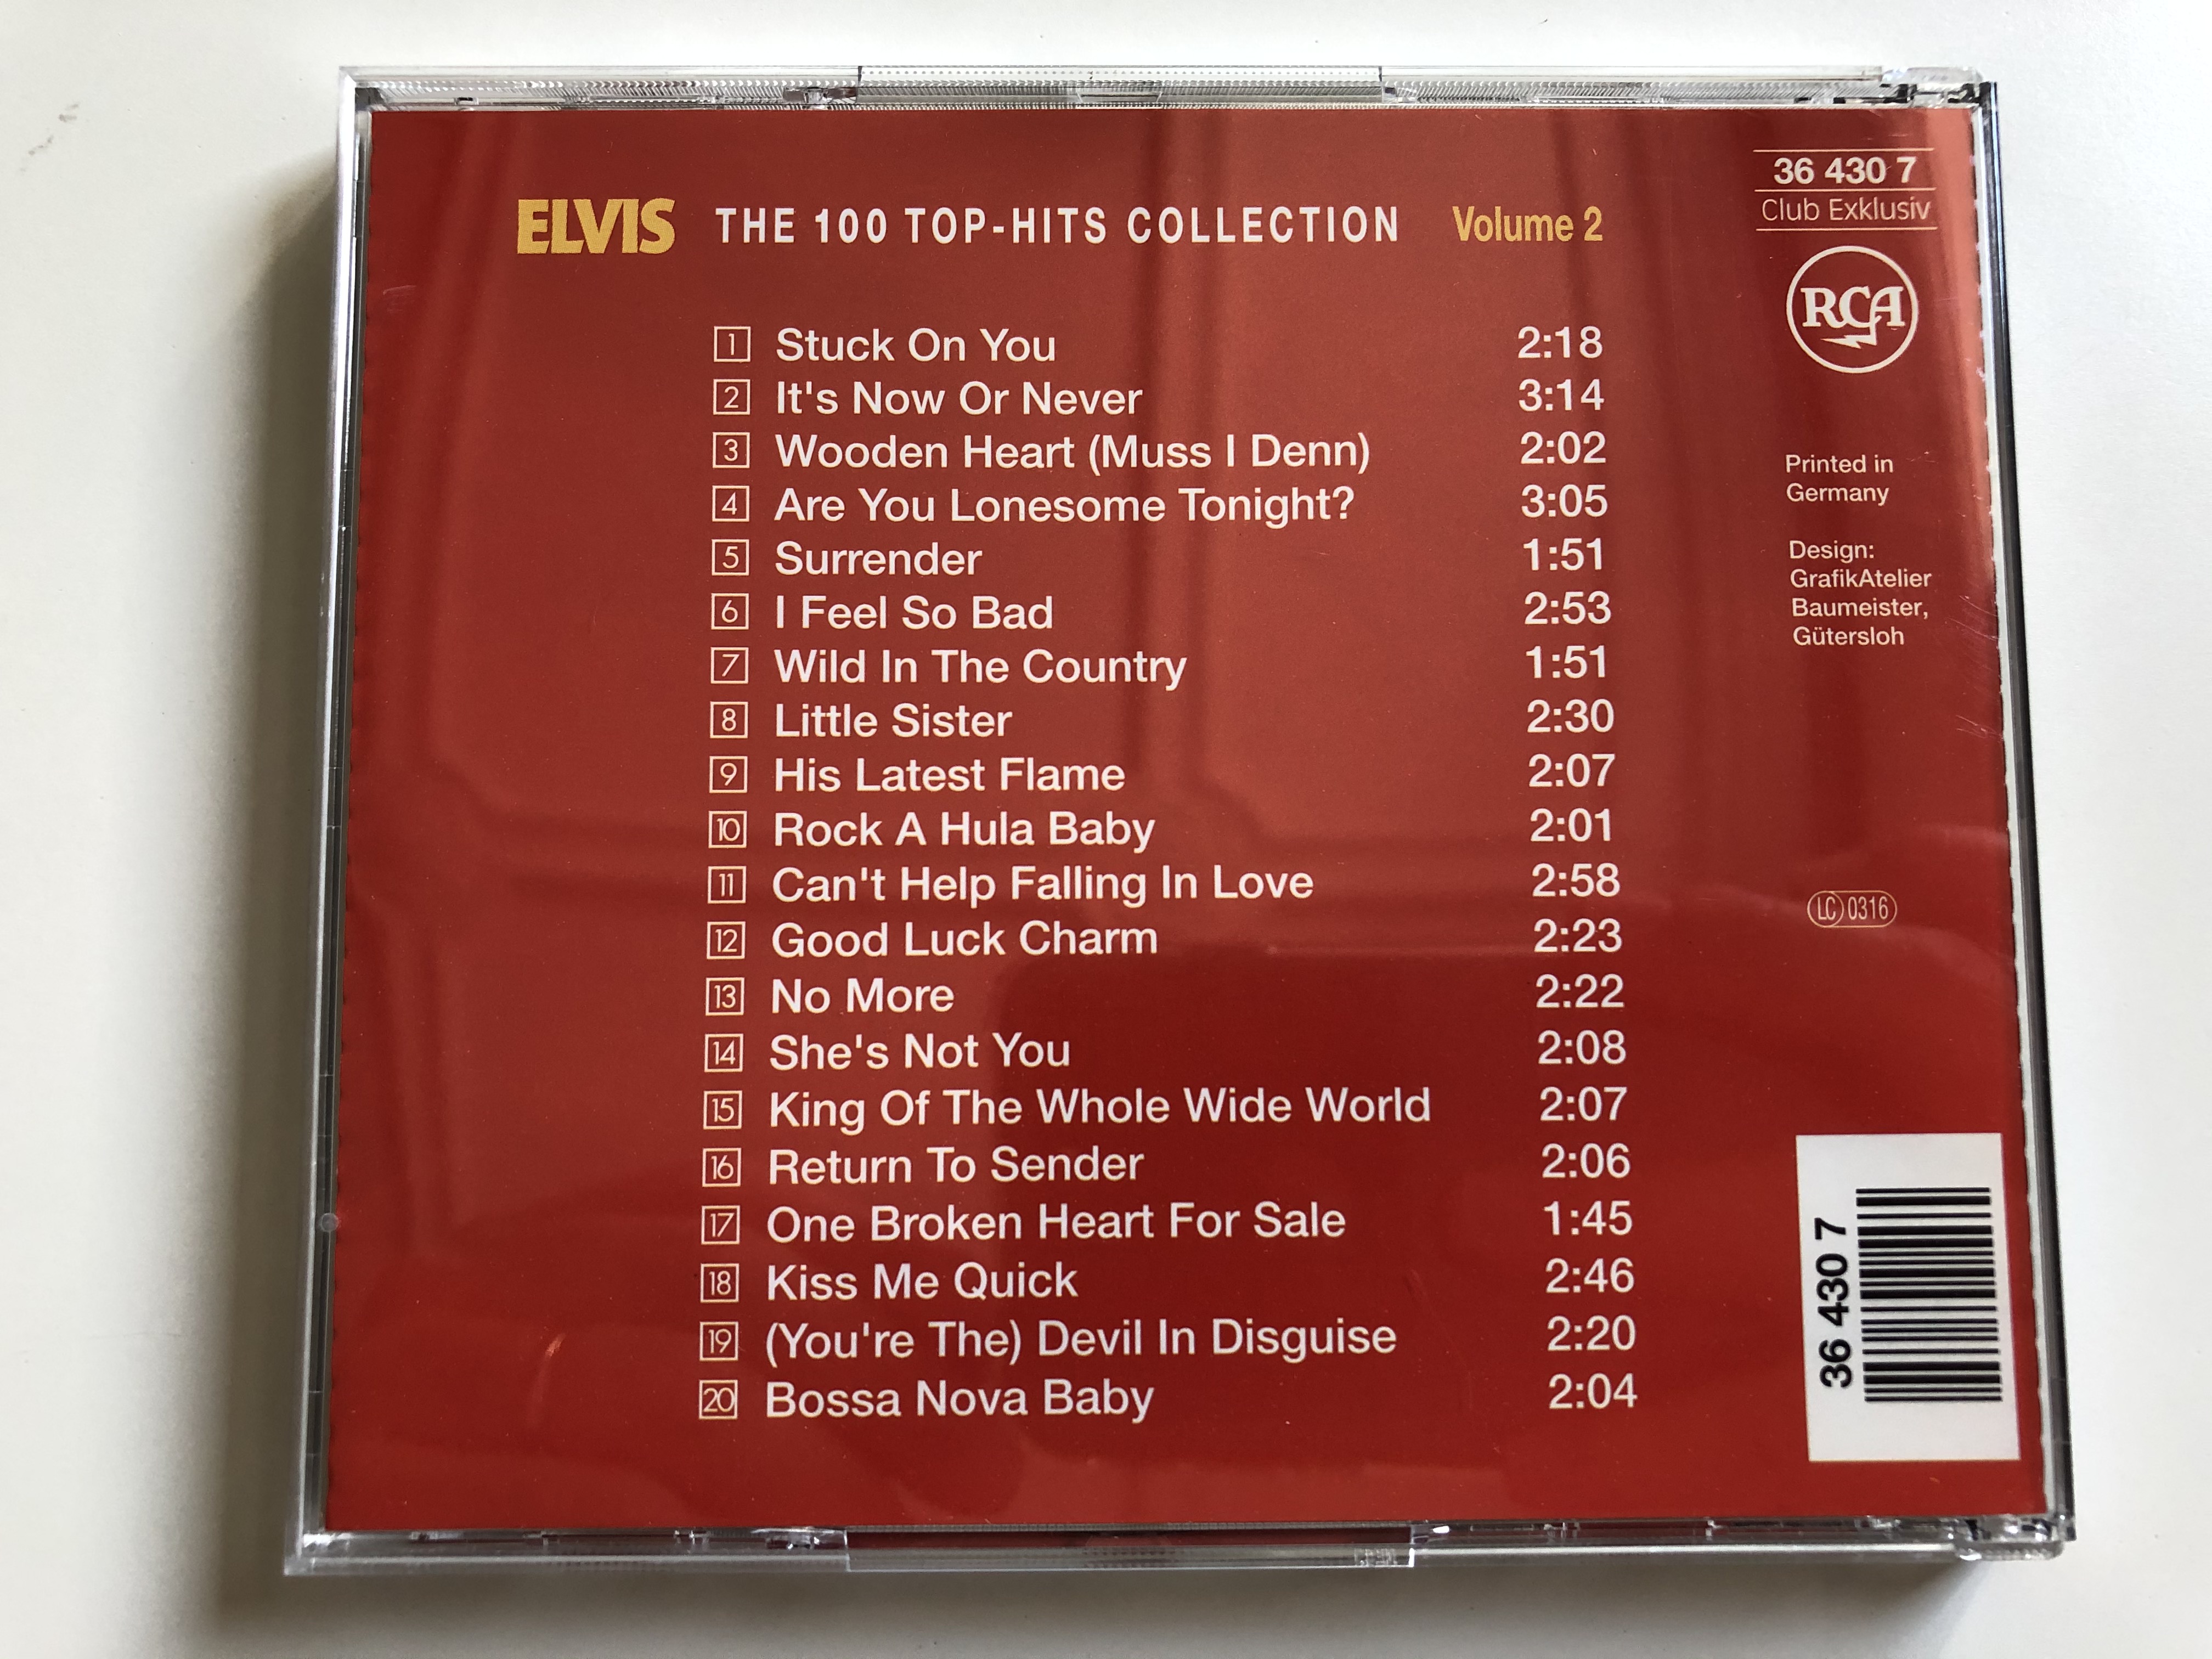 elvis-the-100-top-hits-collection-rca-5x-audio-cd-box-set-1997-stereo-36-428-1-12-.jpg